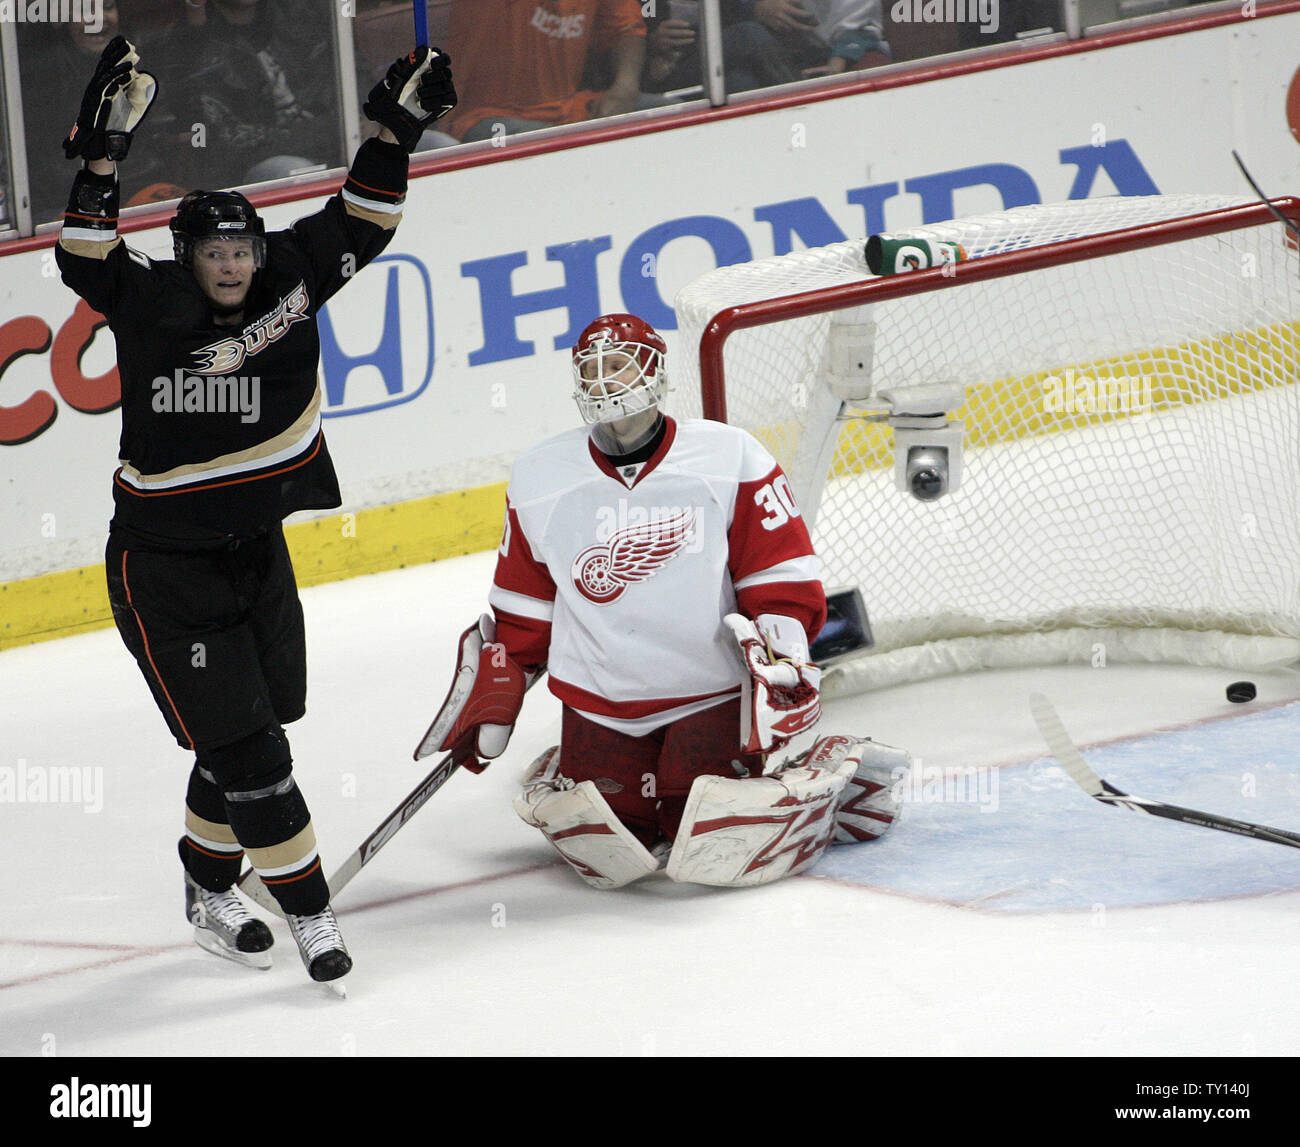 Detroit Red Wings goalie Chris Osgood makes a save in the second period of  Game 4 of the NHL Western Conference semifinals against the Anaheim Ducks  at the Honda Center in Anaheim